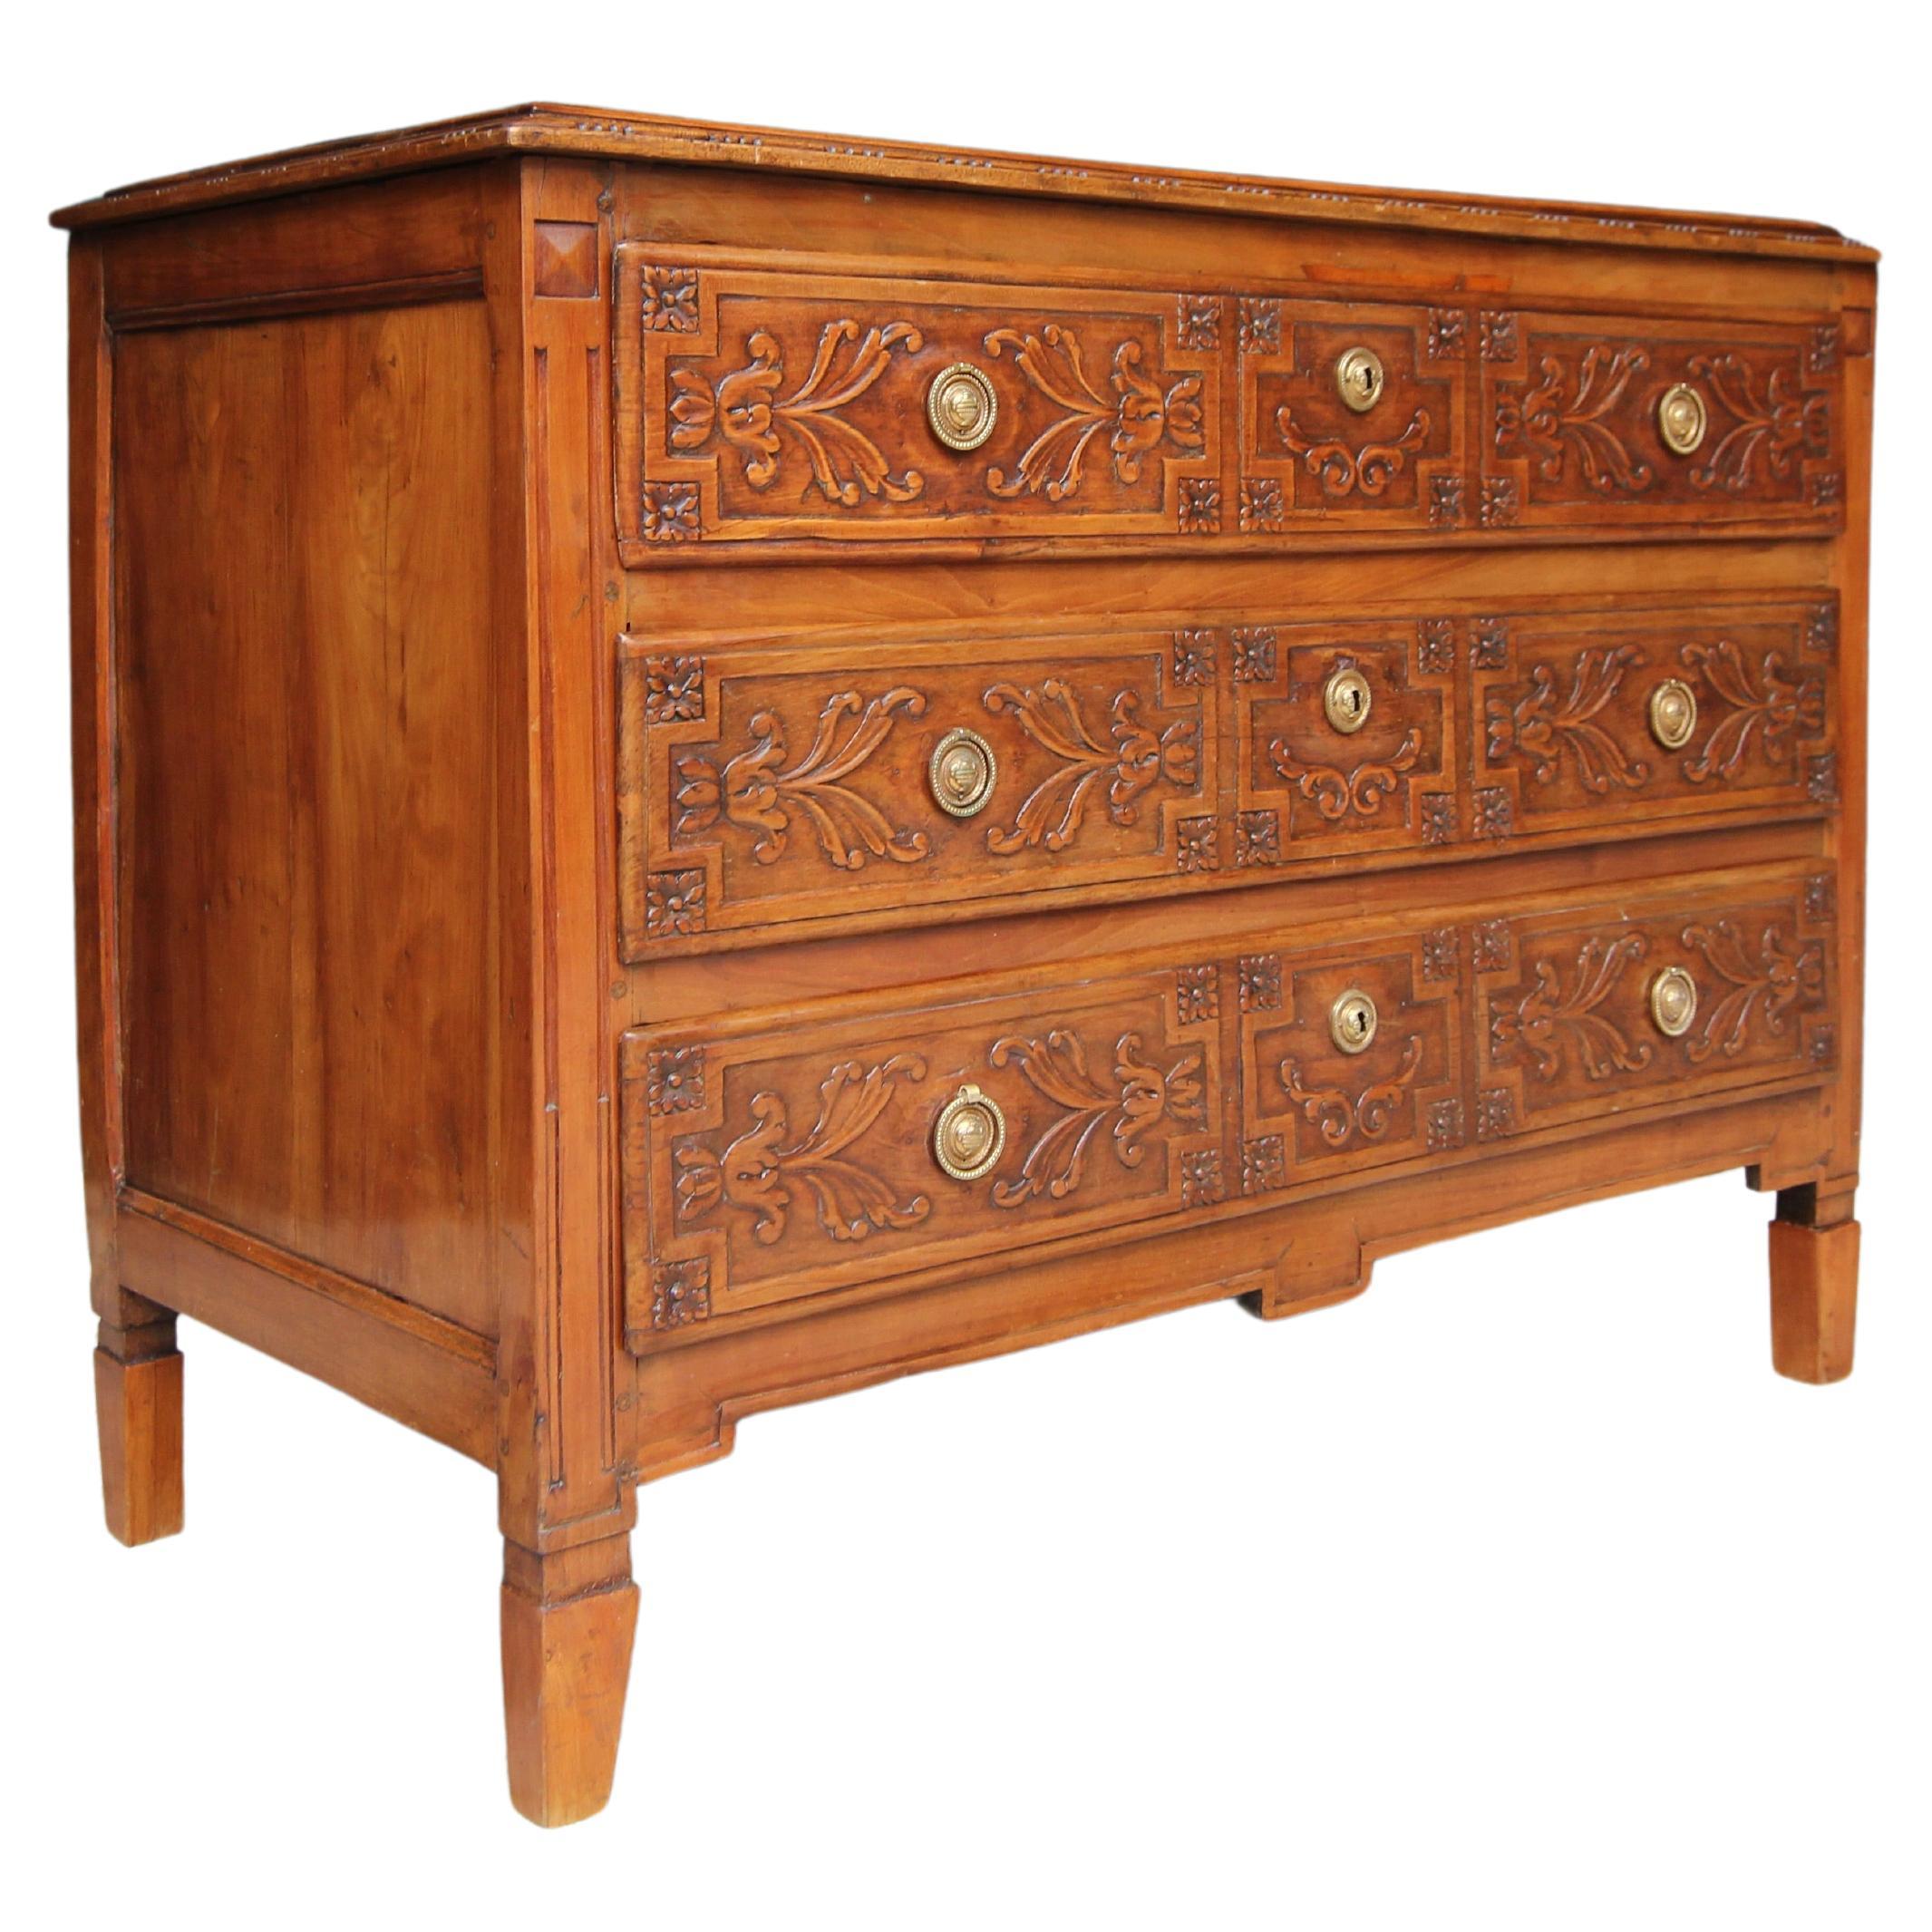 Early 19th Century Louis XVI Style Cherry Wood Chest of Drawers